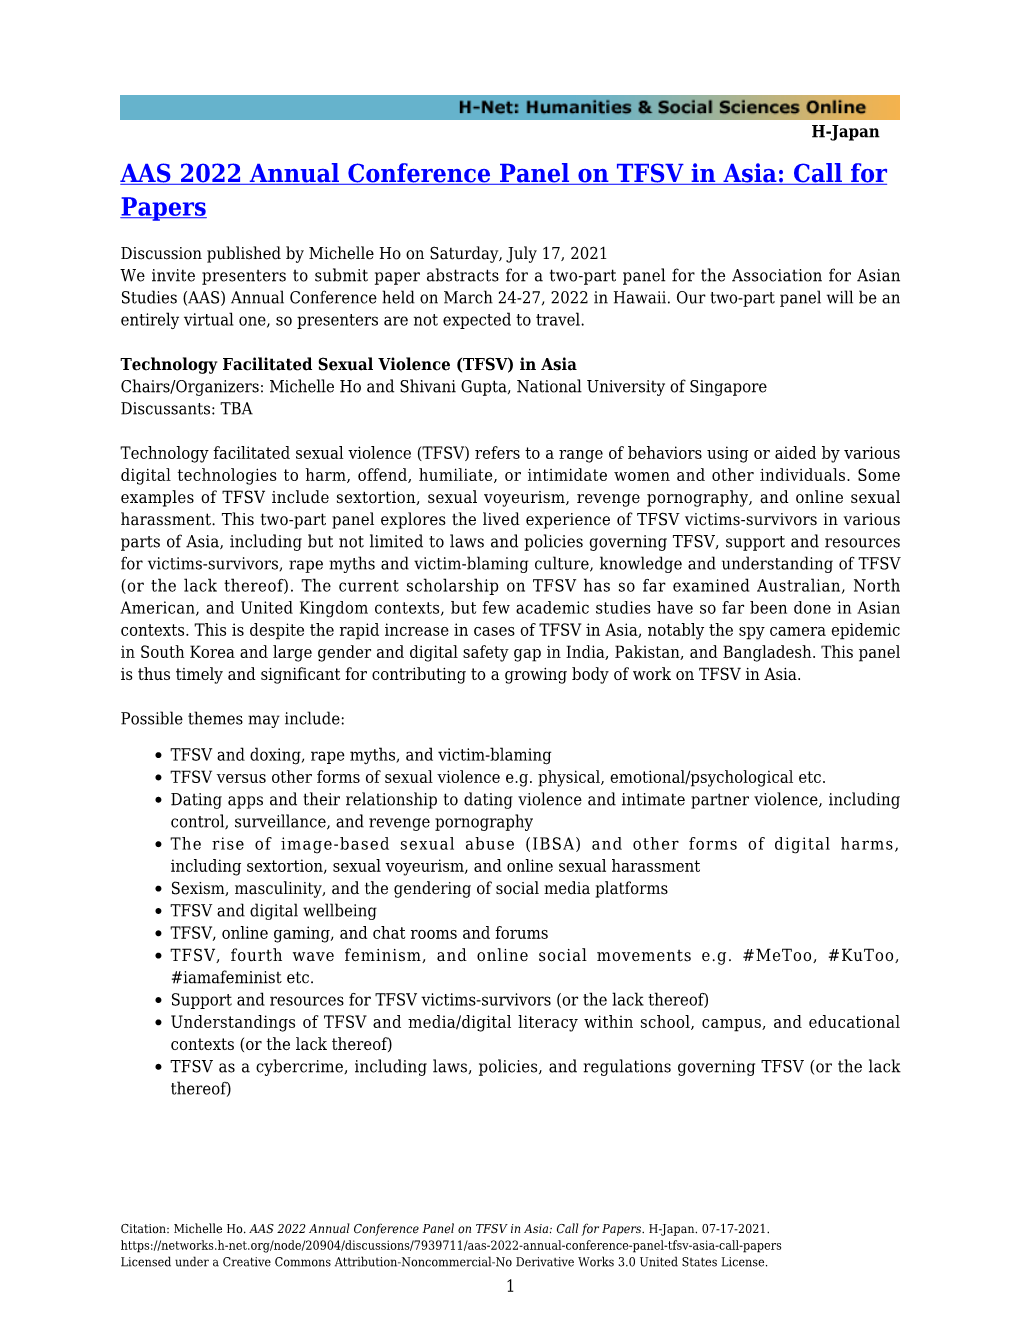 AAS 2022 Annual Conference Panel on TFSV in Asia: Call for Papers